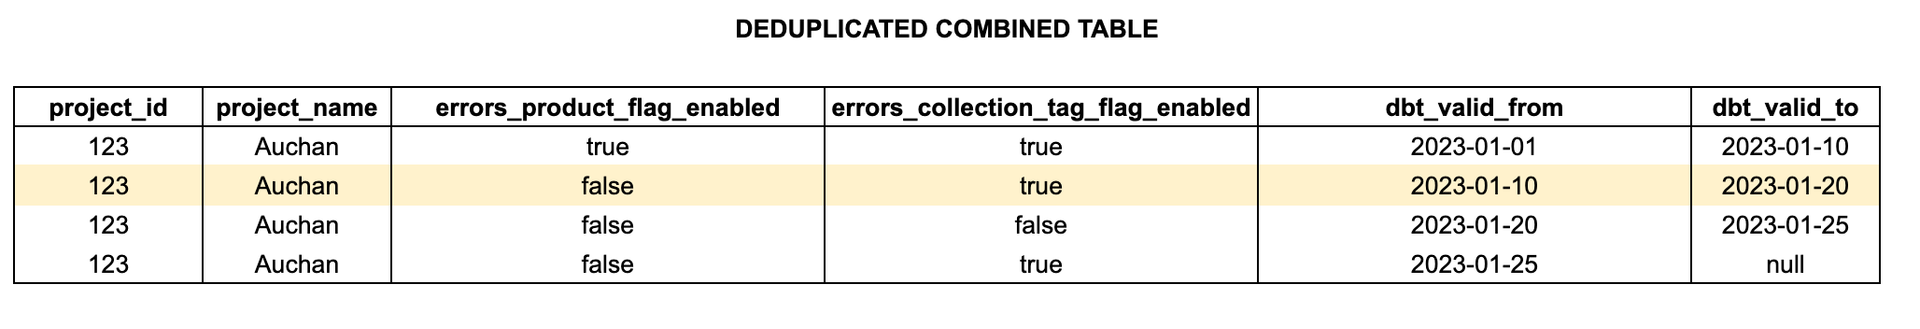 Combined tables with deduplicates